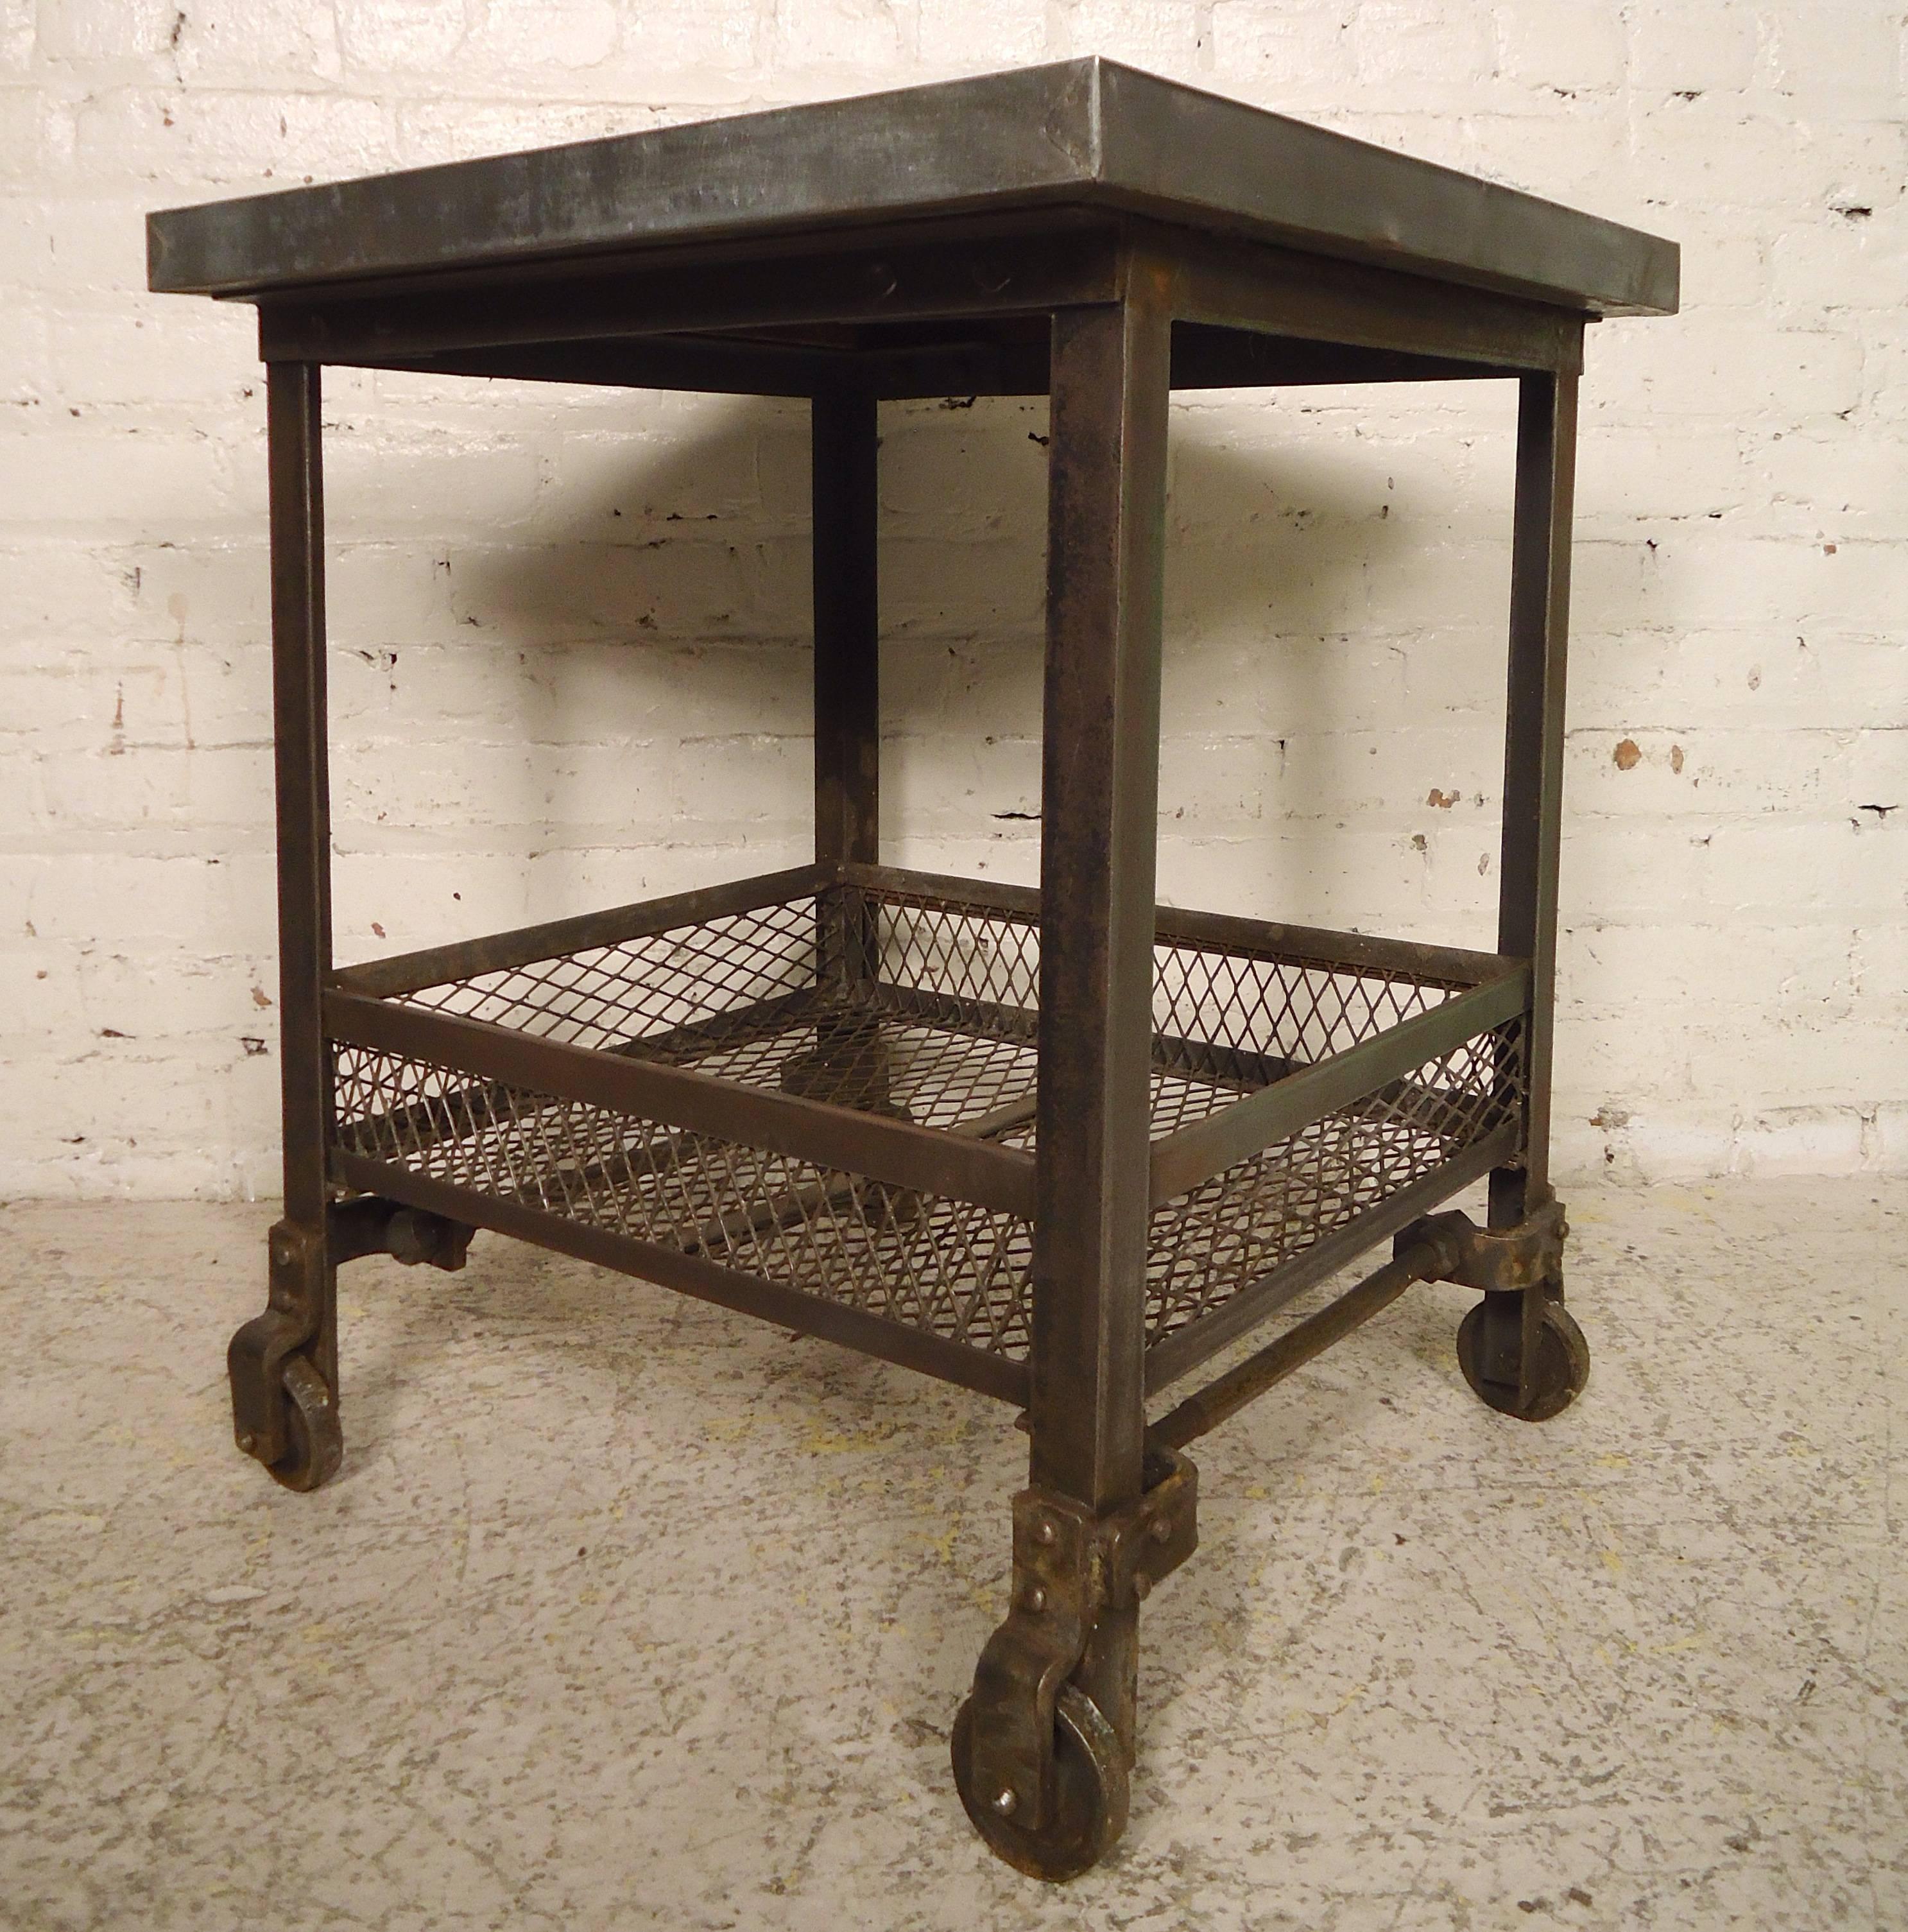 Heavy Industrial two-tier factory cart, with rolling casters. This has a great factory look and works as a side table or rolling cart.

(Please confirm item location NY or NJ with dealer).